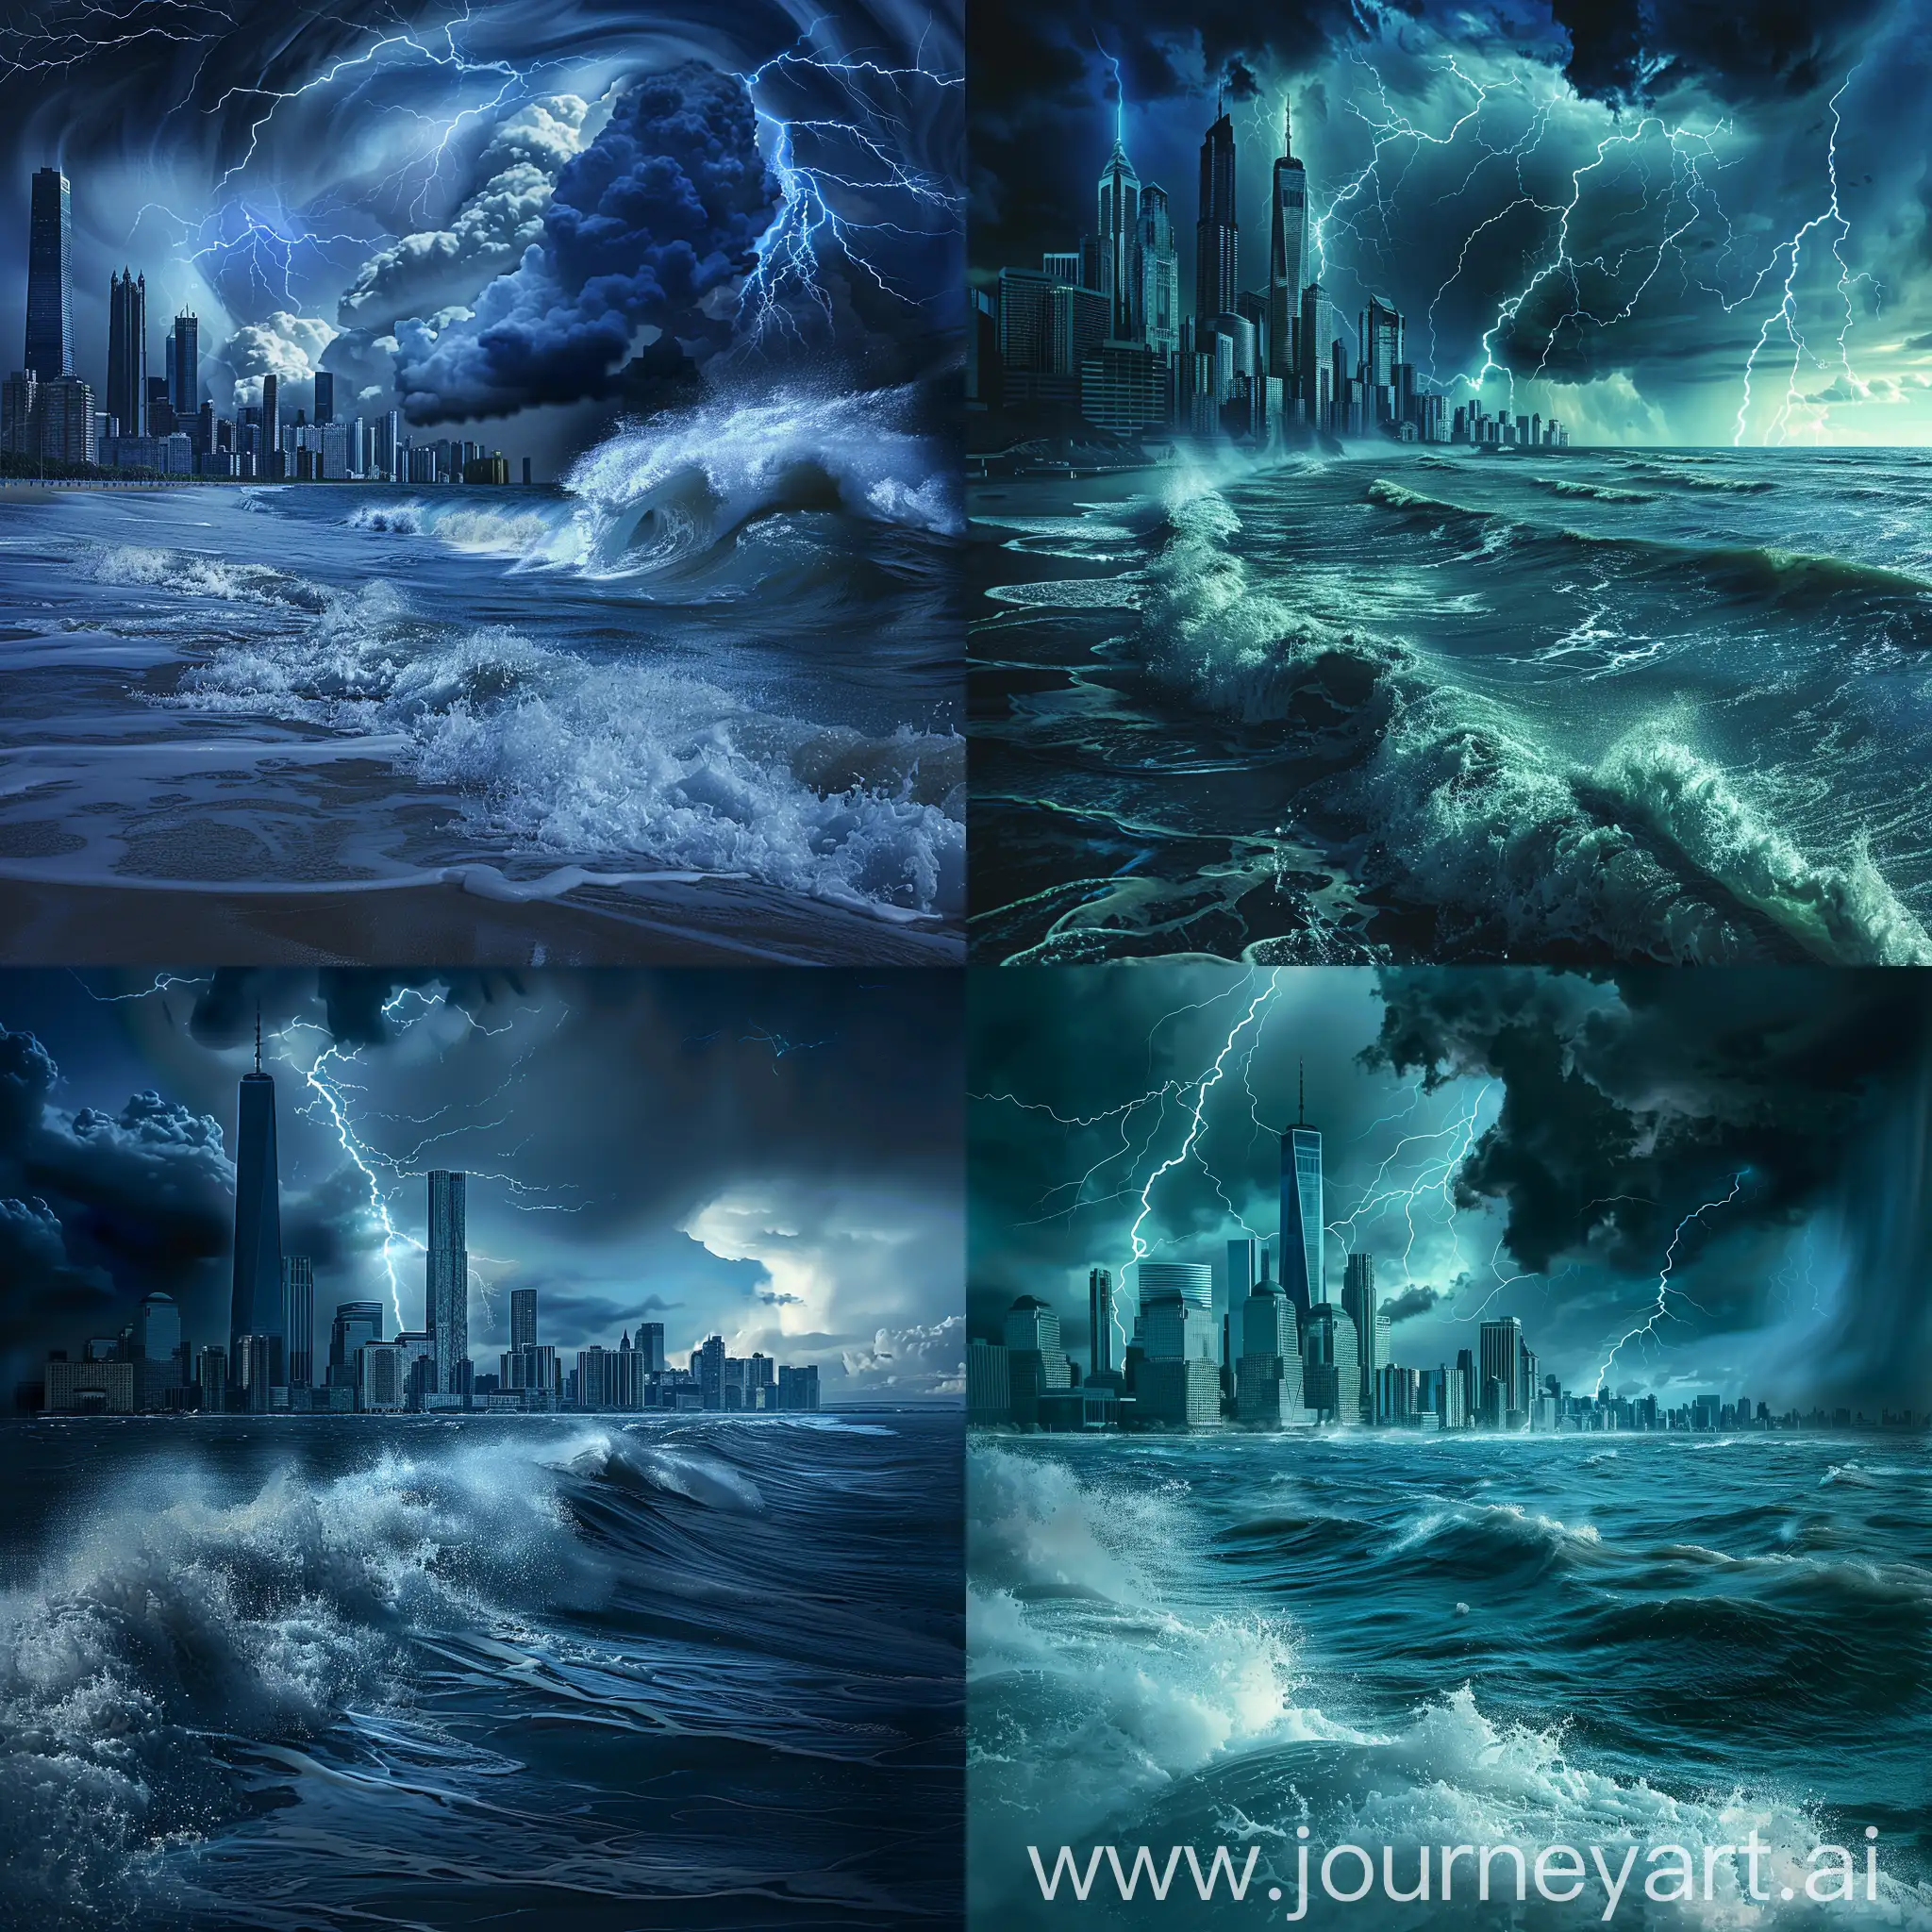 open ocean, storm, thunderstorm, lightning flashes, dark torn sky, huge tsunami waves coming, skyscrapers looming over the coast